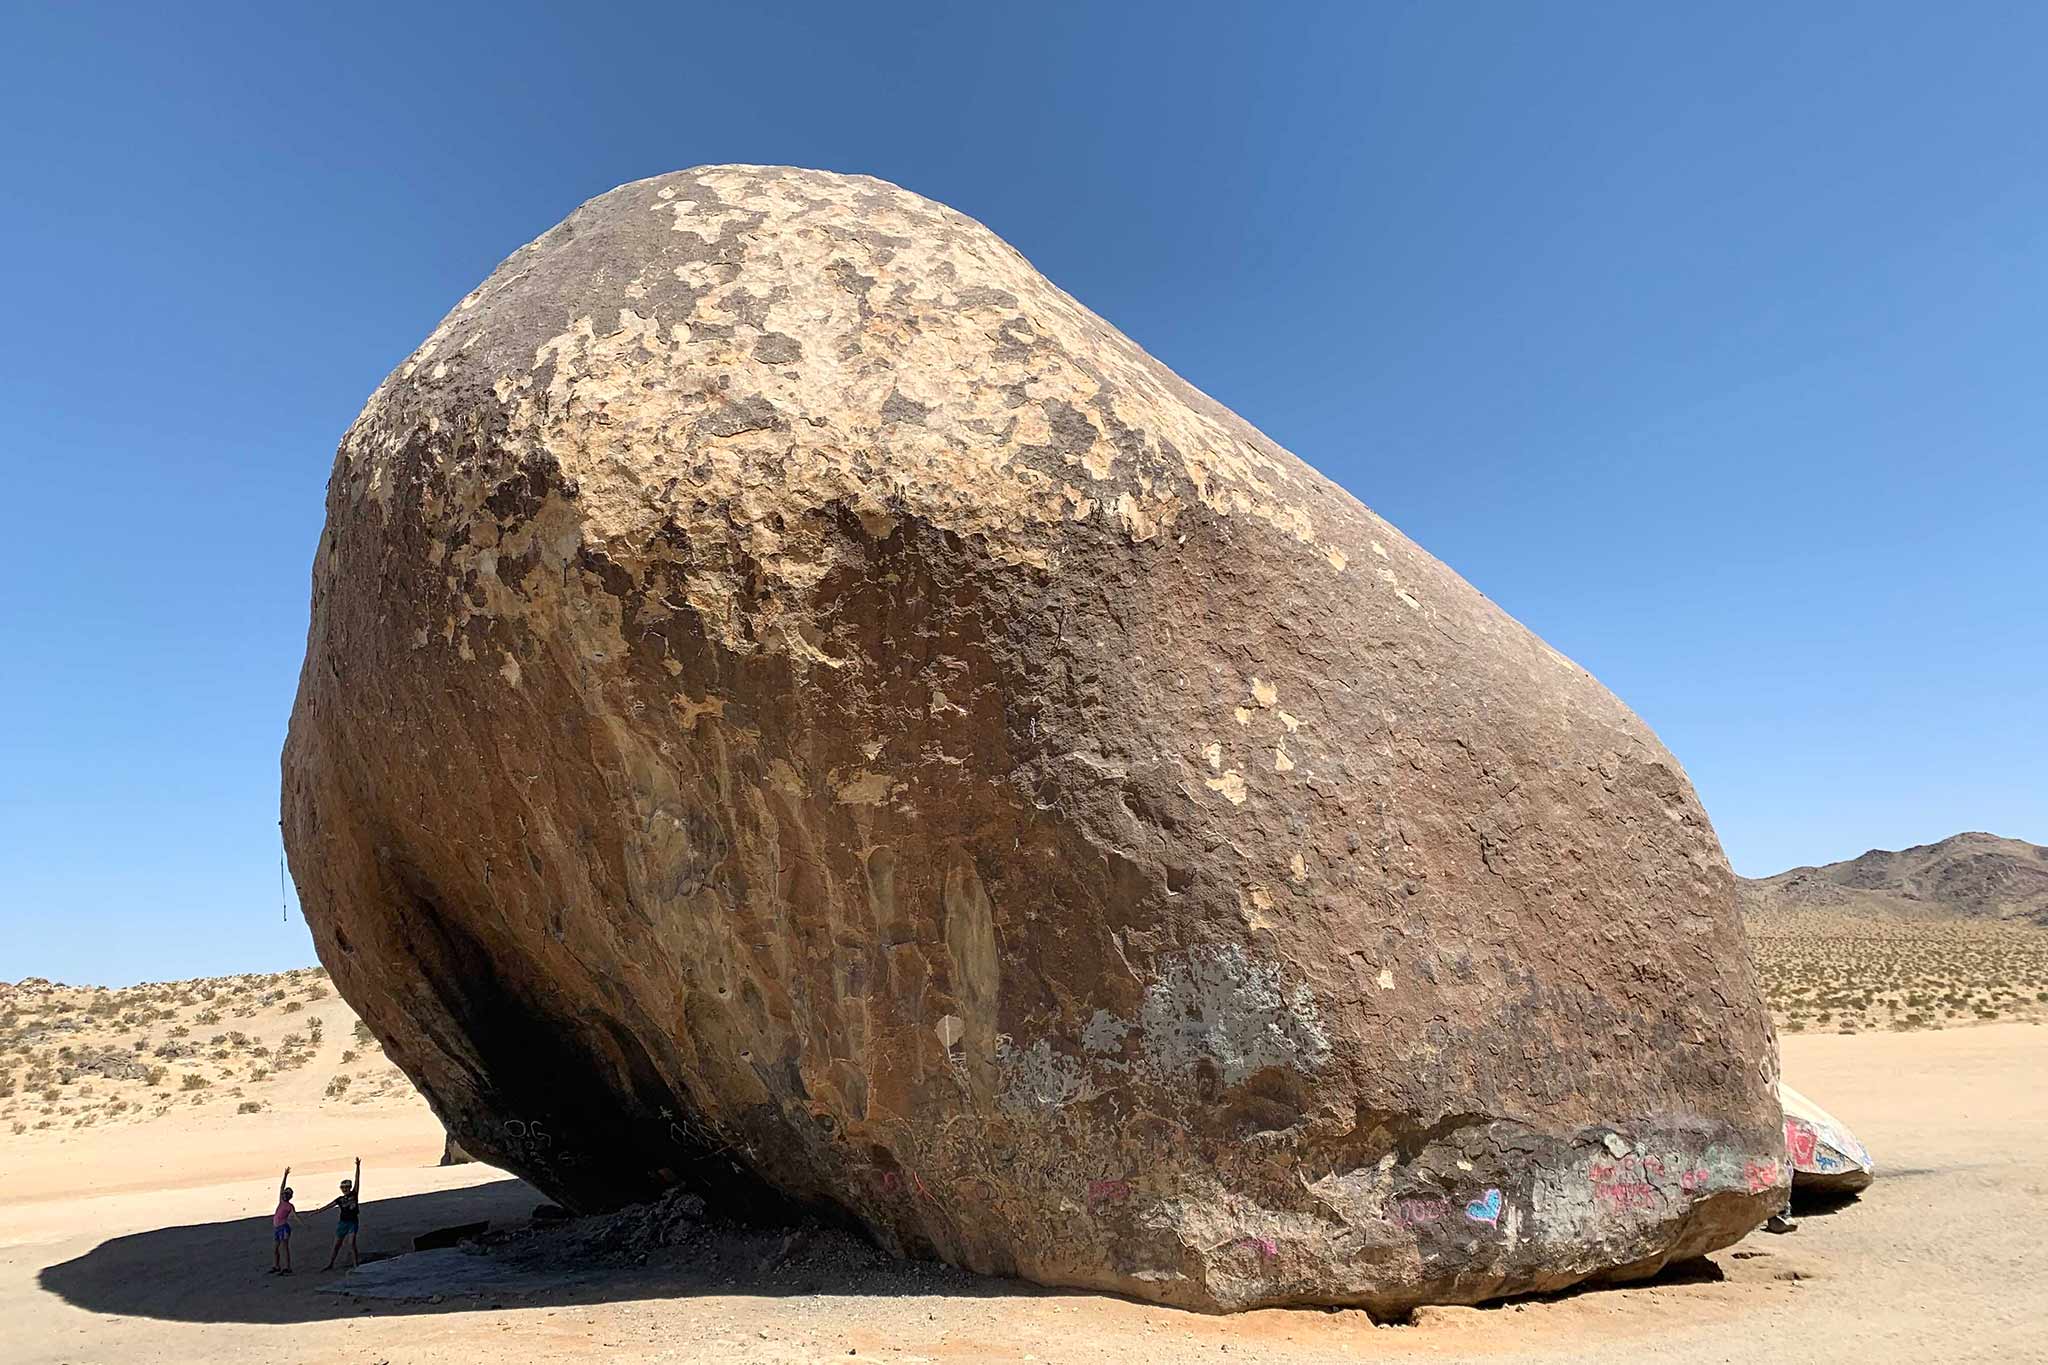 Large boulder in desert sands with clear blue skies and sandy brush in the background